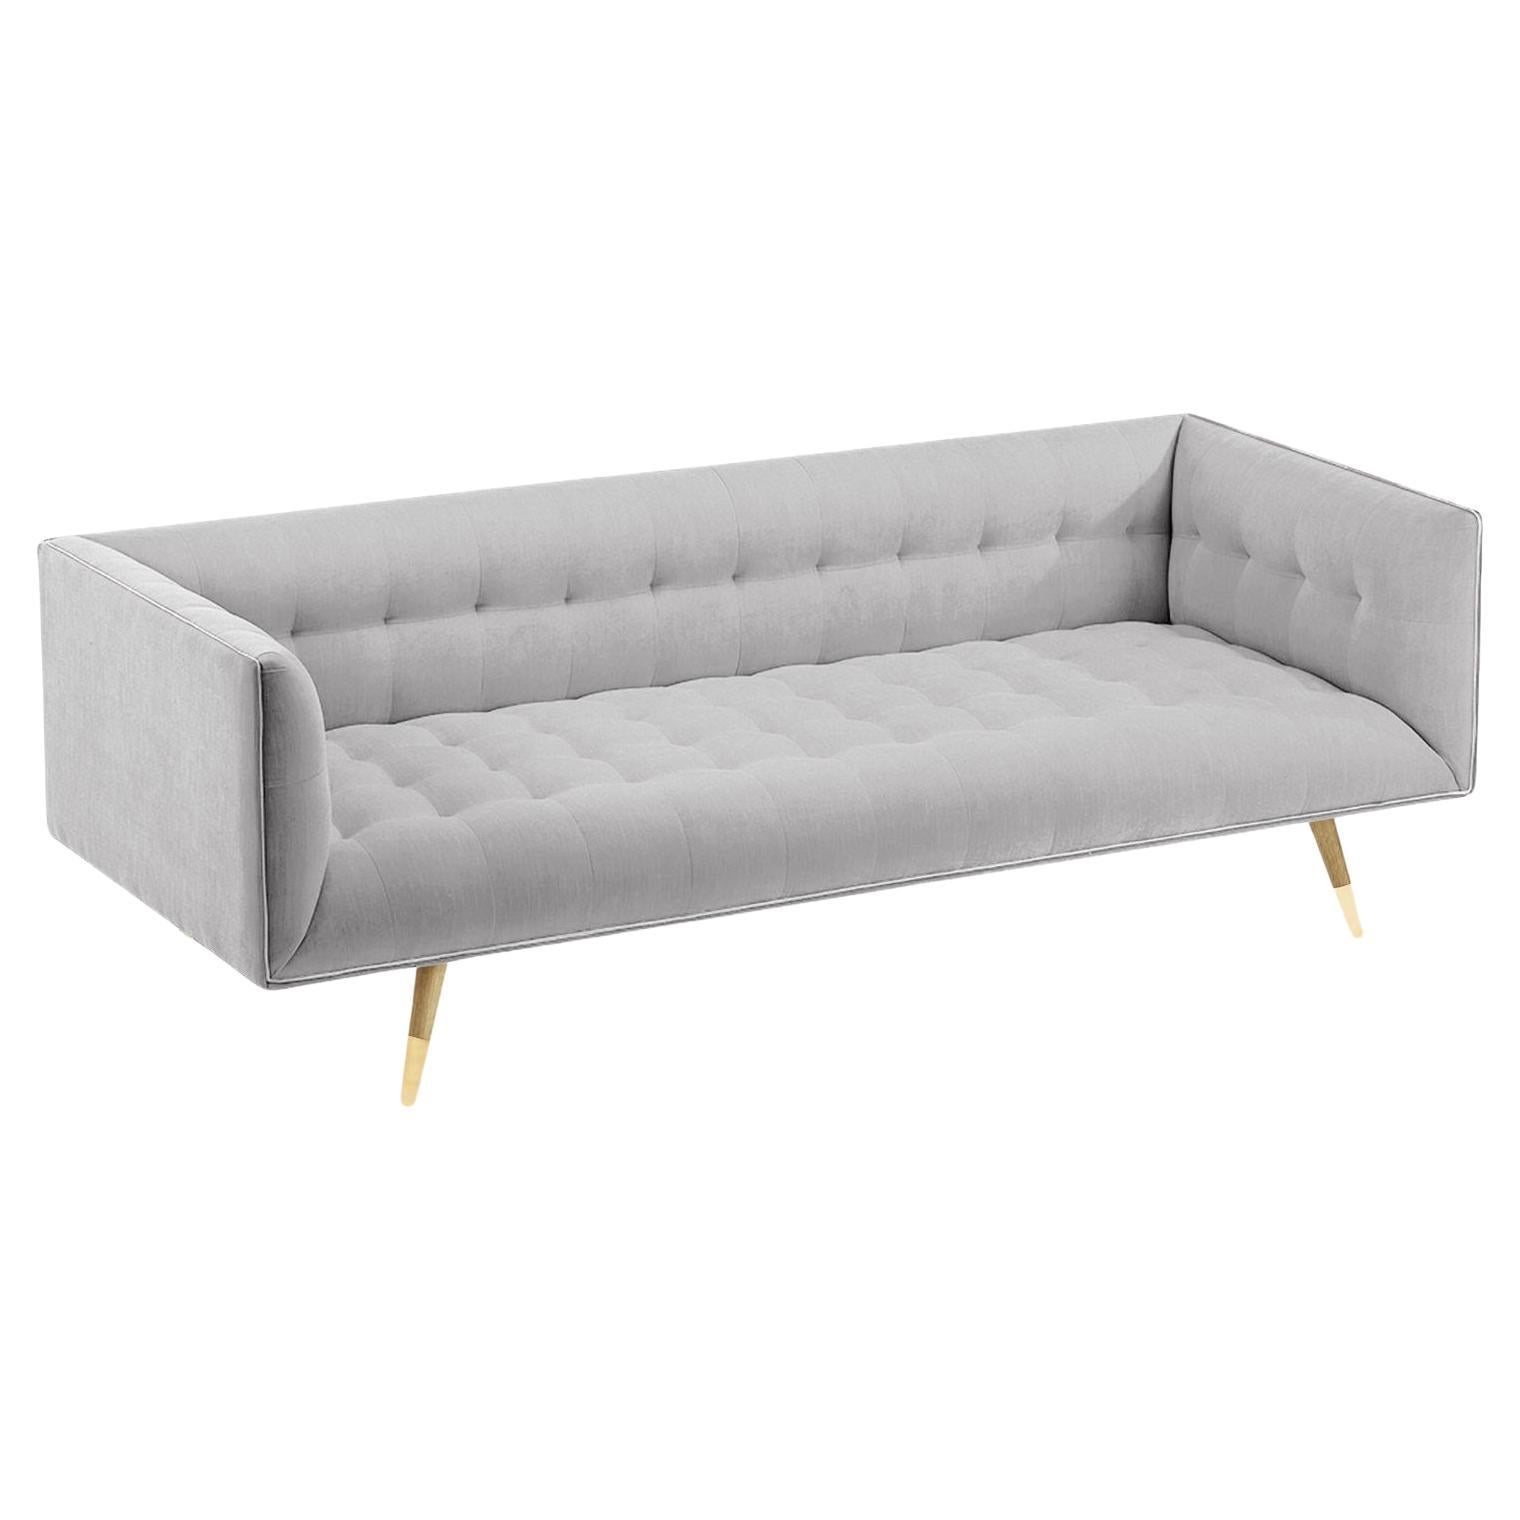 The Dust Sofa is constructed in solid wood, with an elevated tufted elegant look and a comfortable seating. Handmade with a solid wood base and wood legs with a stylish polished brass metal feet detail. Available as an option.

The Dust Sofa is